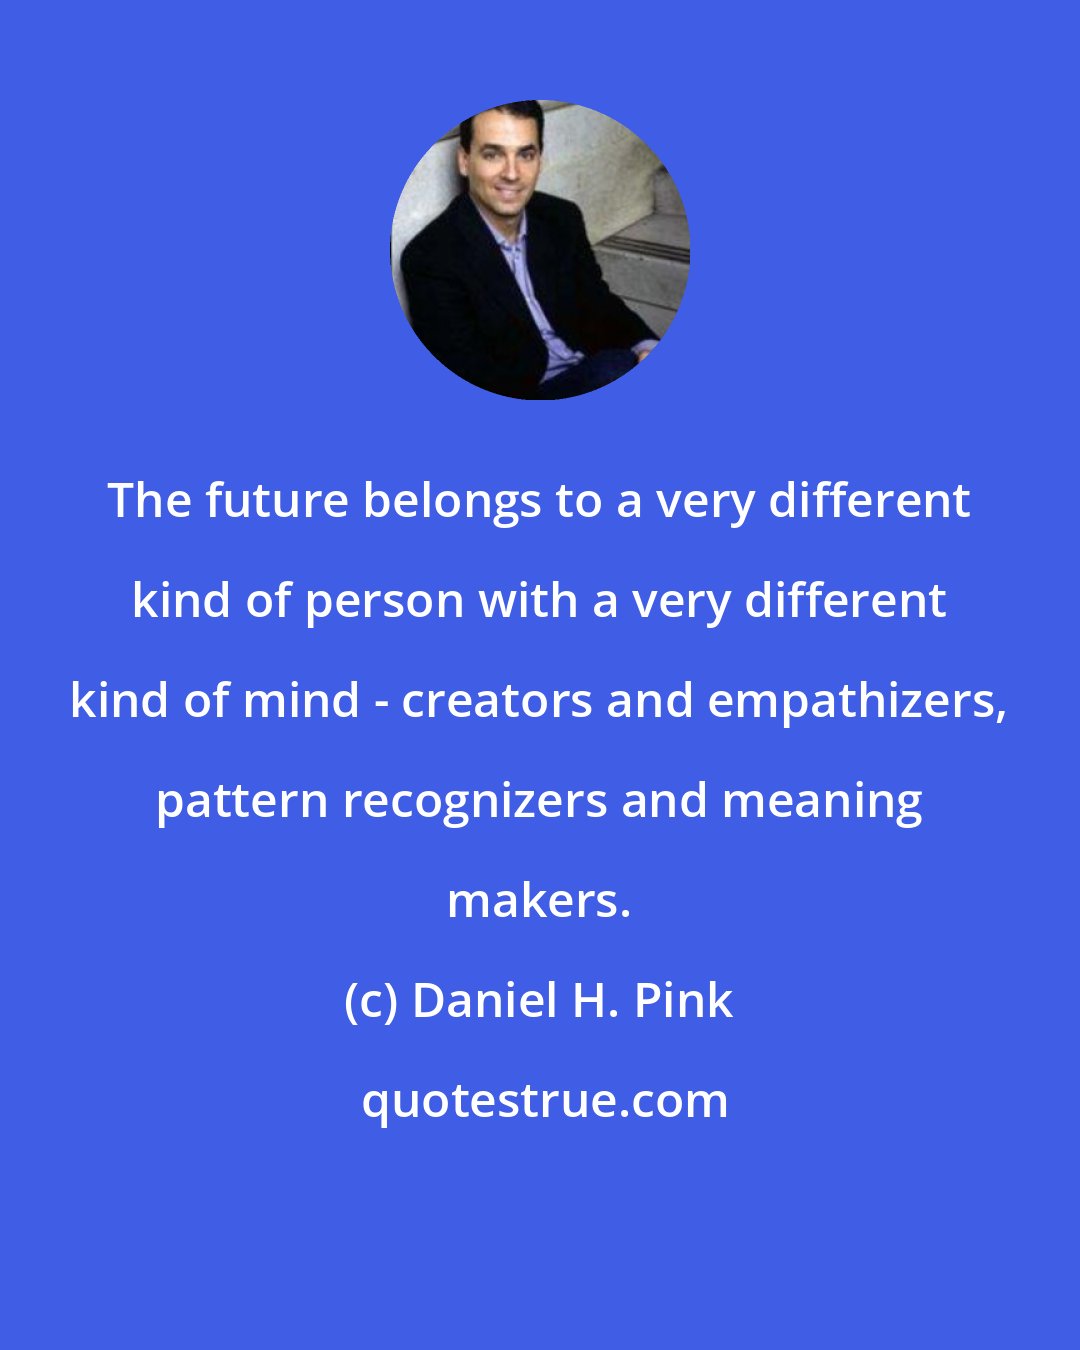 Daniel H. Pink: The future belongs to a very different kind of person with a very different kind of mind - creators and empathizers, pattern recognizers and meaning makers.